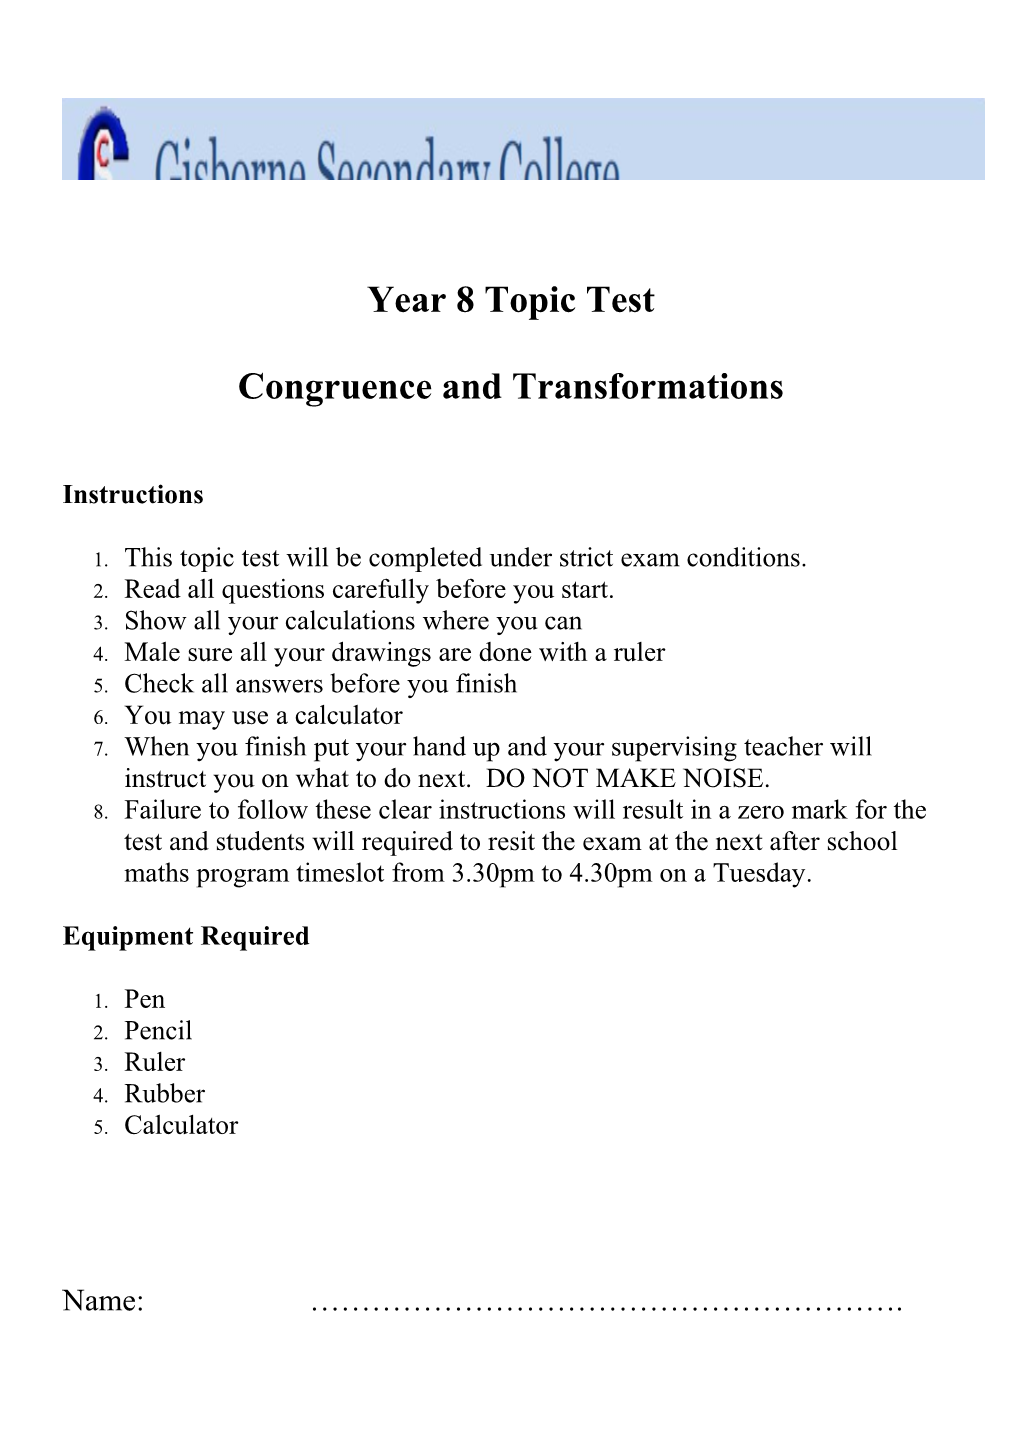 Year 8 Topic Test